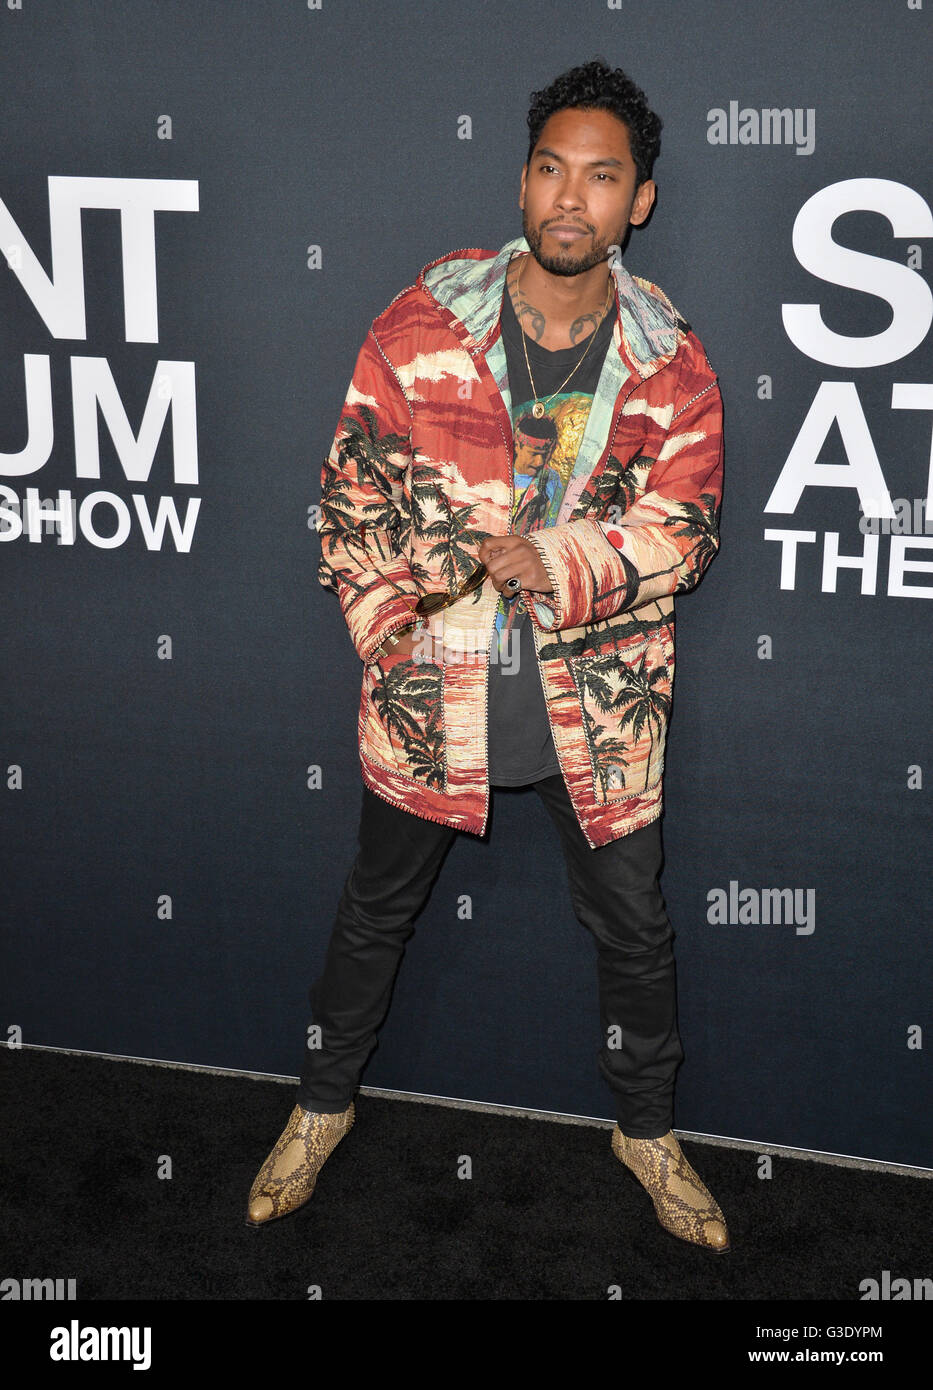 LOS ANGELES, CA - FEBRUARY 10, 2016: Singer Miguel arriving at the Saint Laurent at the Palladium fashion show at the Hollywood Palladium. Stock Photo